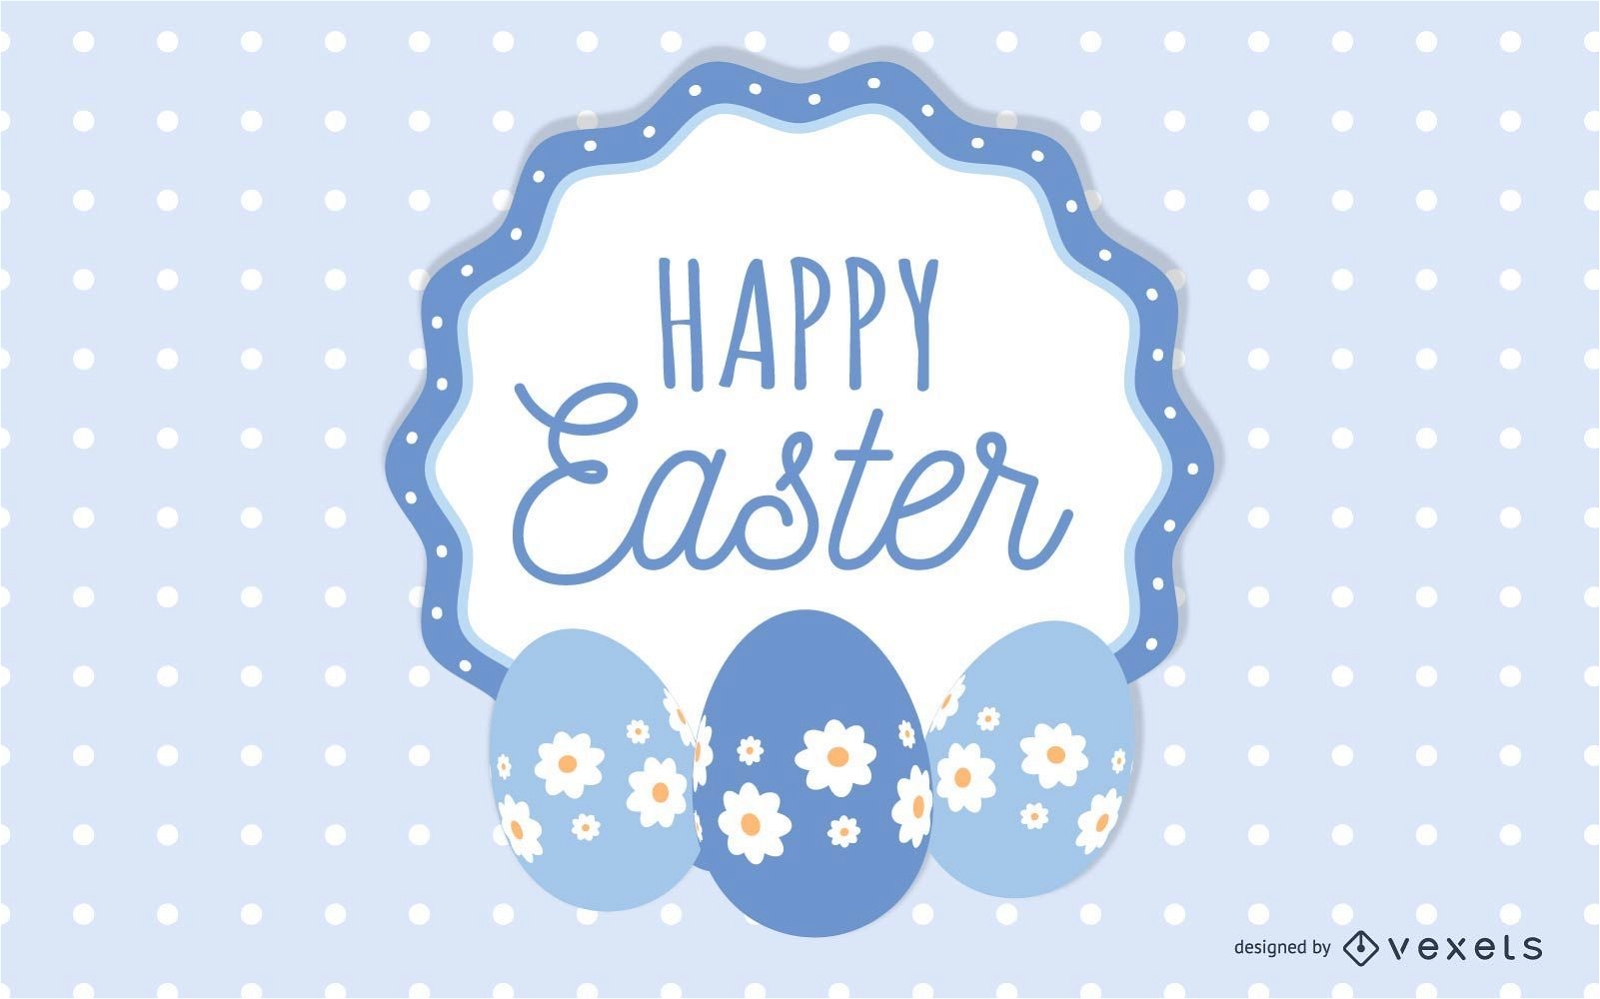 Happy Easter card design